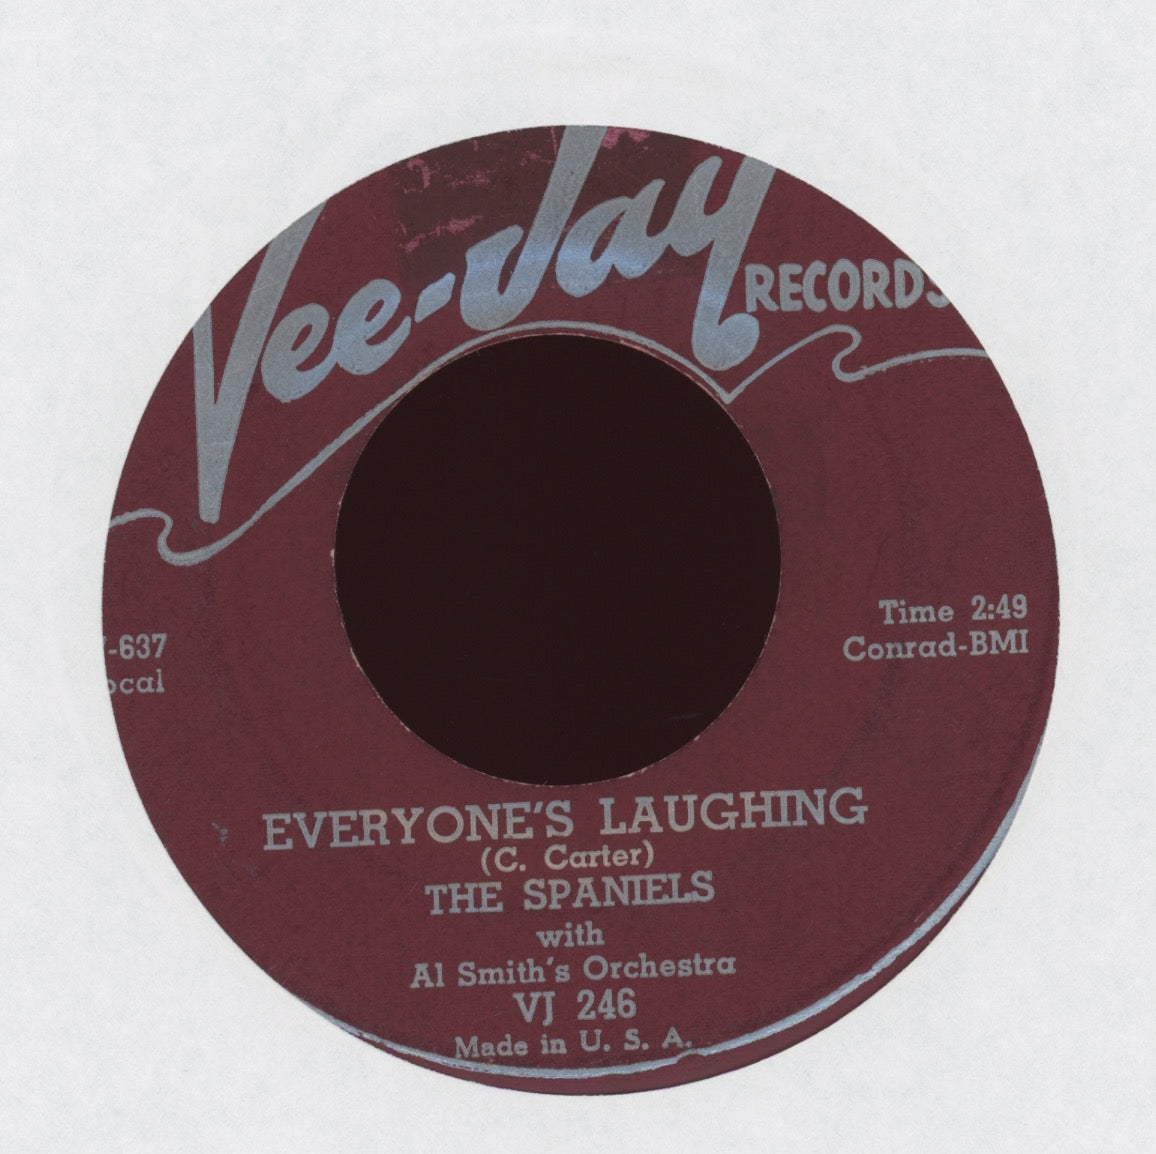 The Spaniels - Everyone's Laughing on Vee Jay